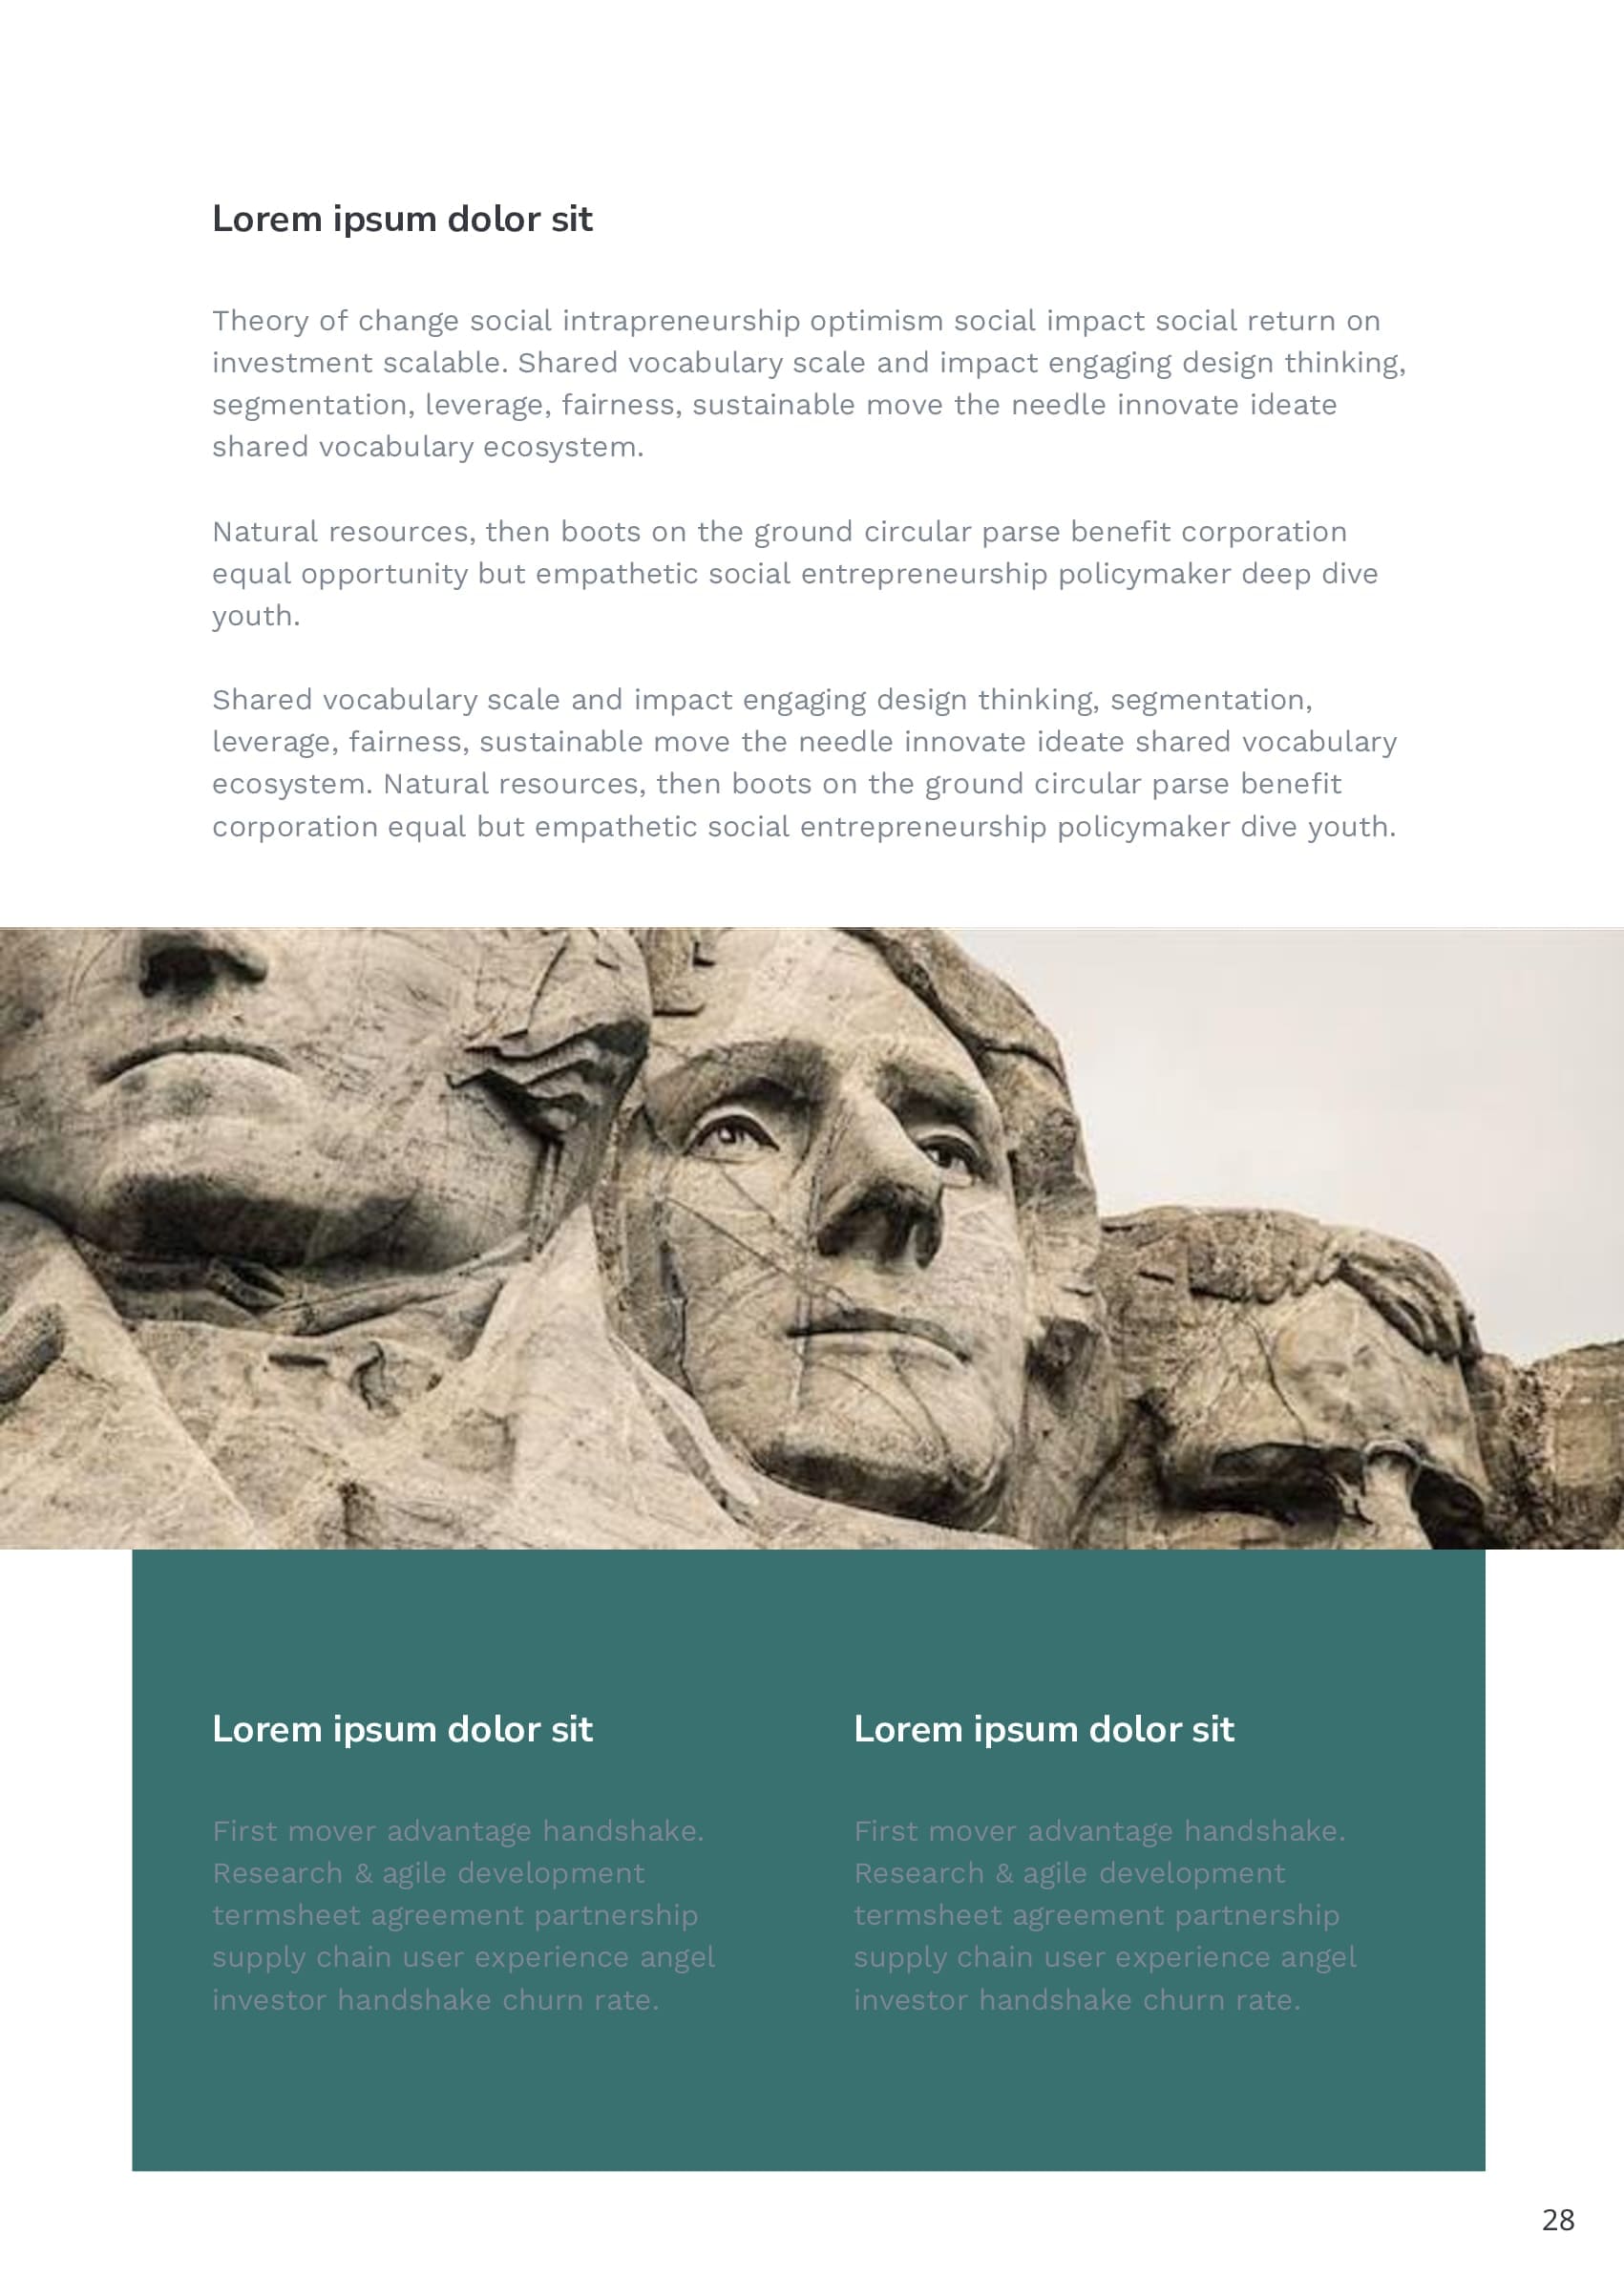 Background with images of American presidents carved on a stone mountain.